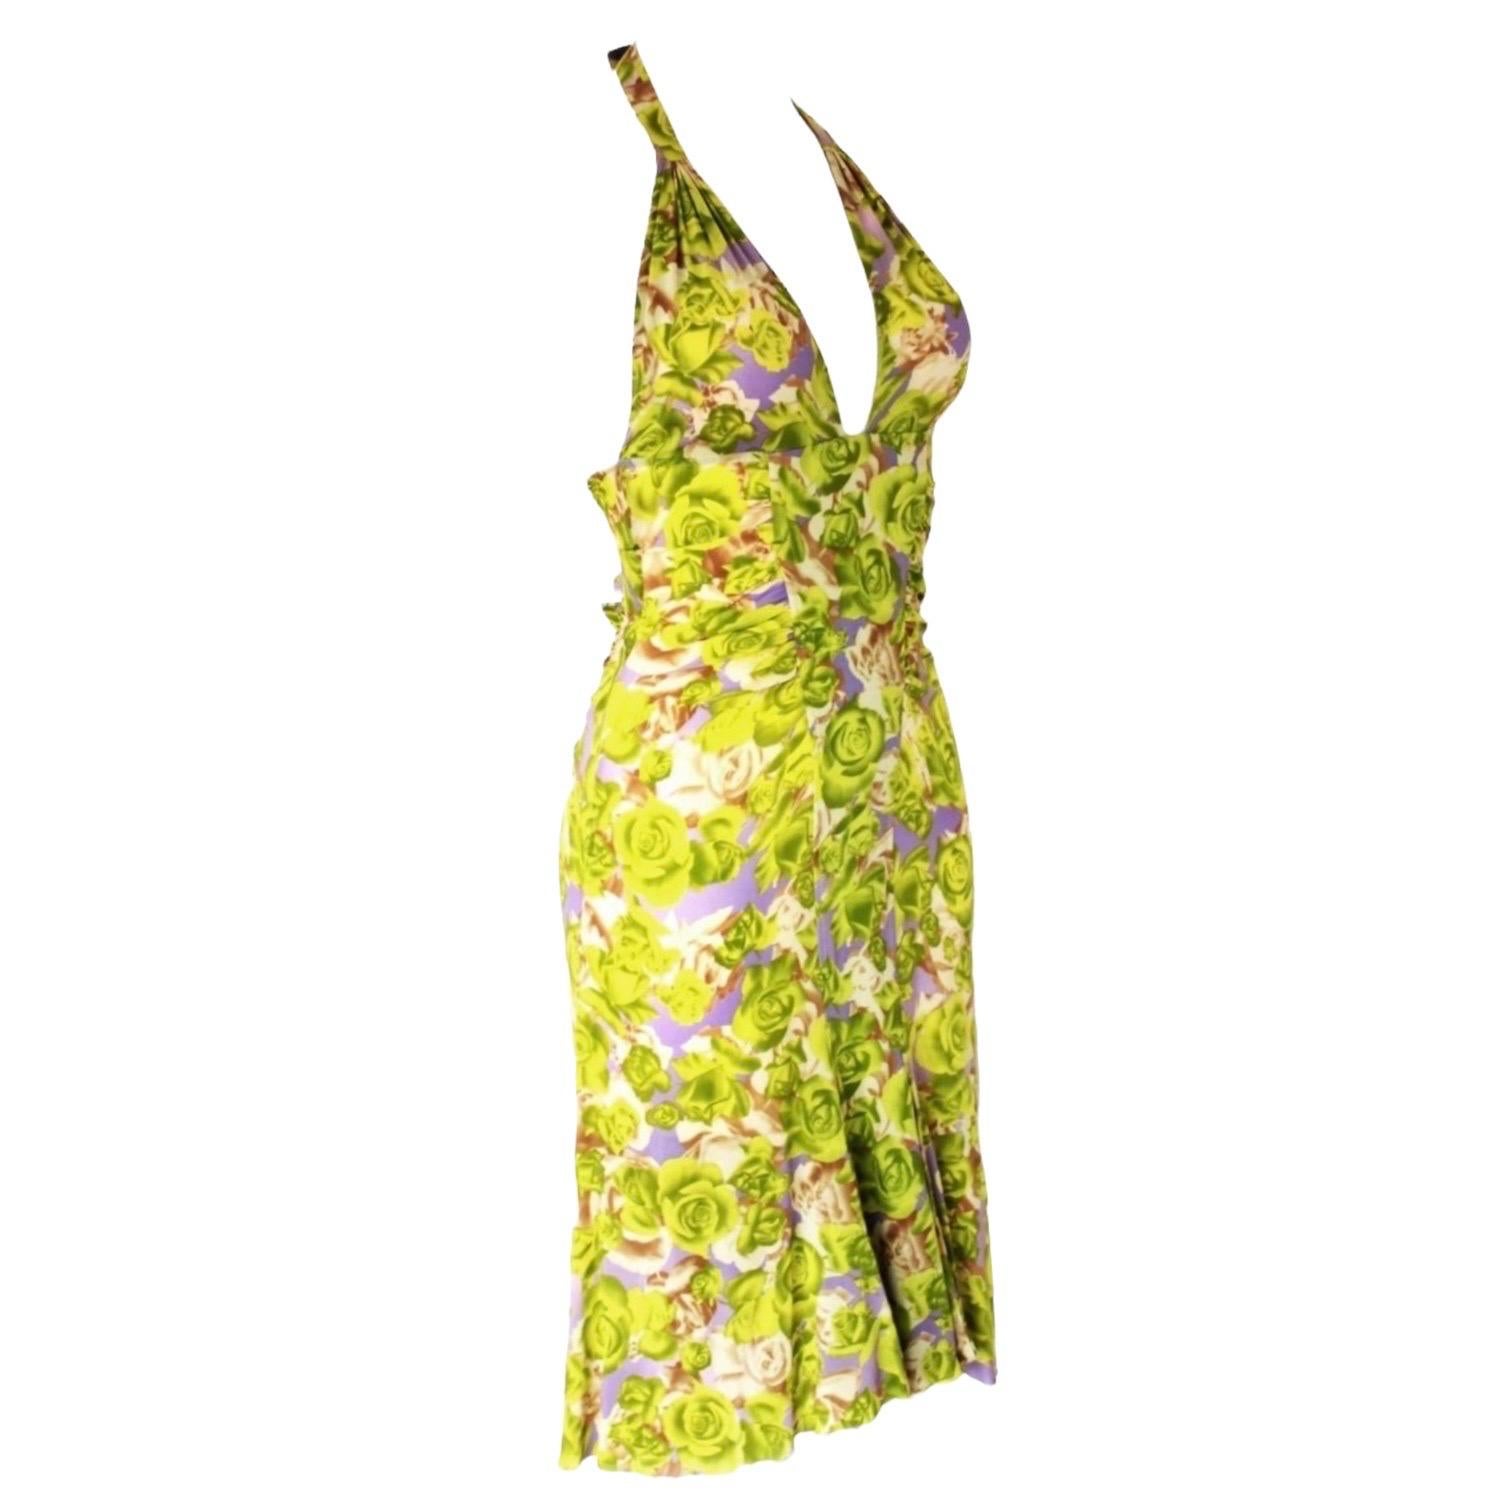 Stunning VERSACE signature dress 
Beautiful rose printed silk
Neckholder with open back
Ruched details
Slight tail - longer on back
Silver-tone hardware details on neckholder and back
Pleated in the back
Completely lined with fine lime silk
Seen on